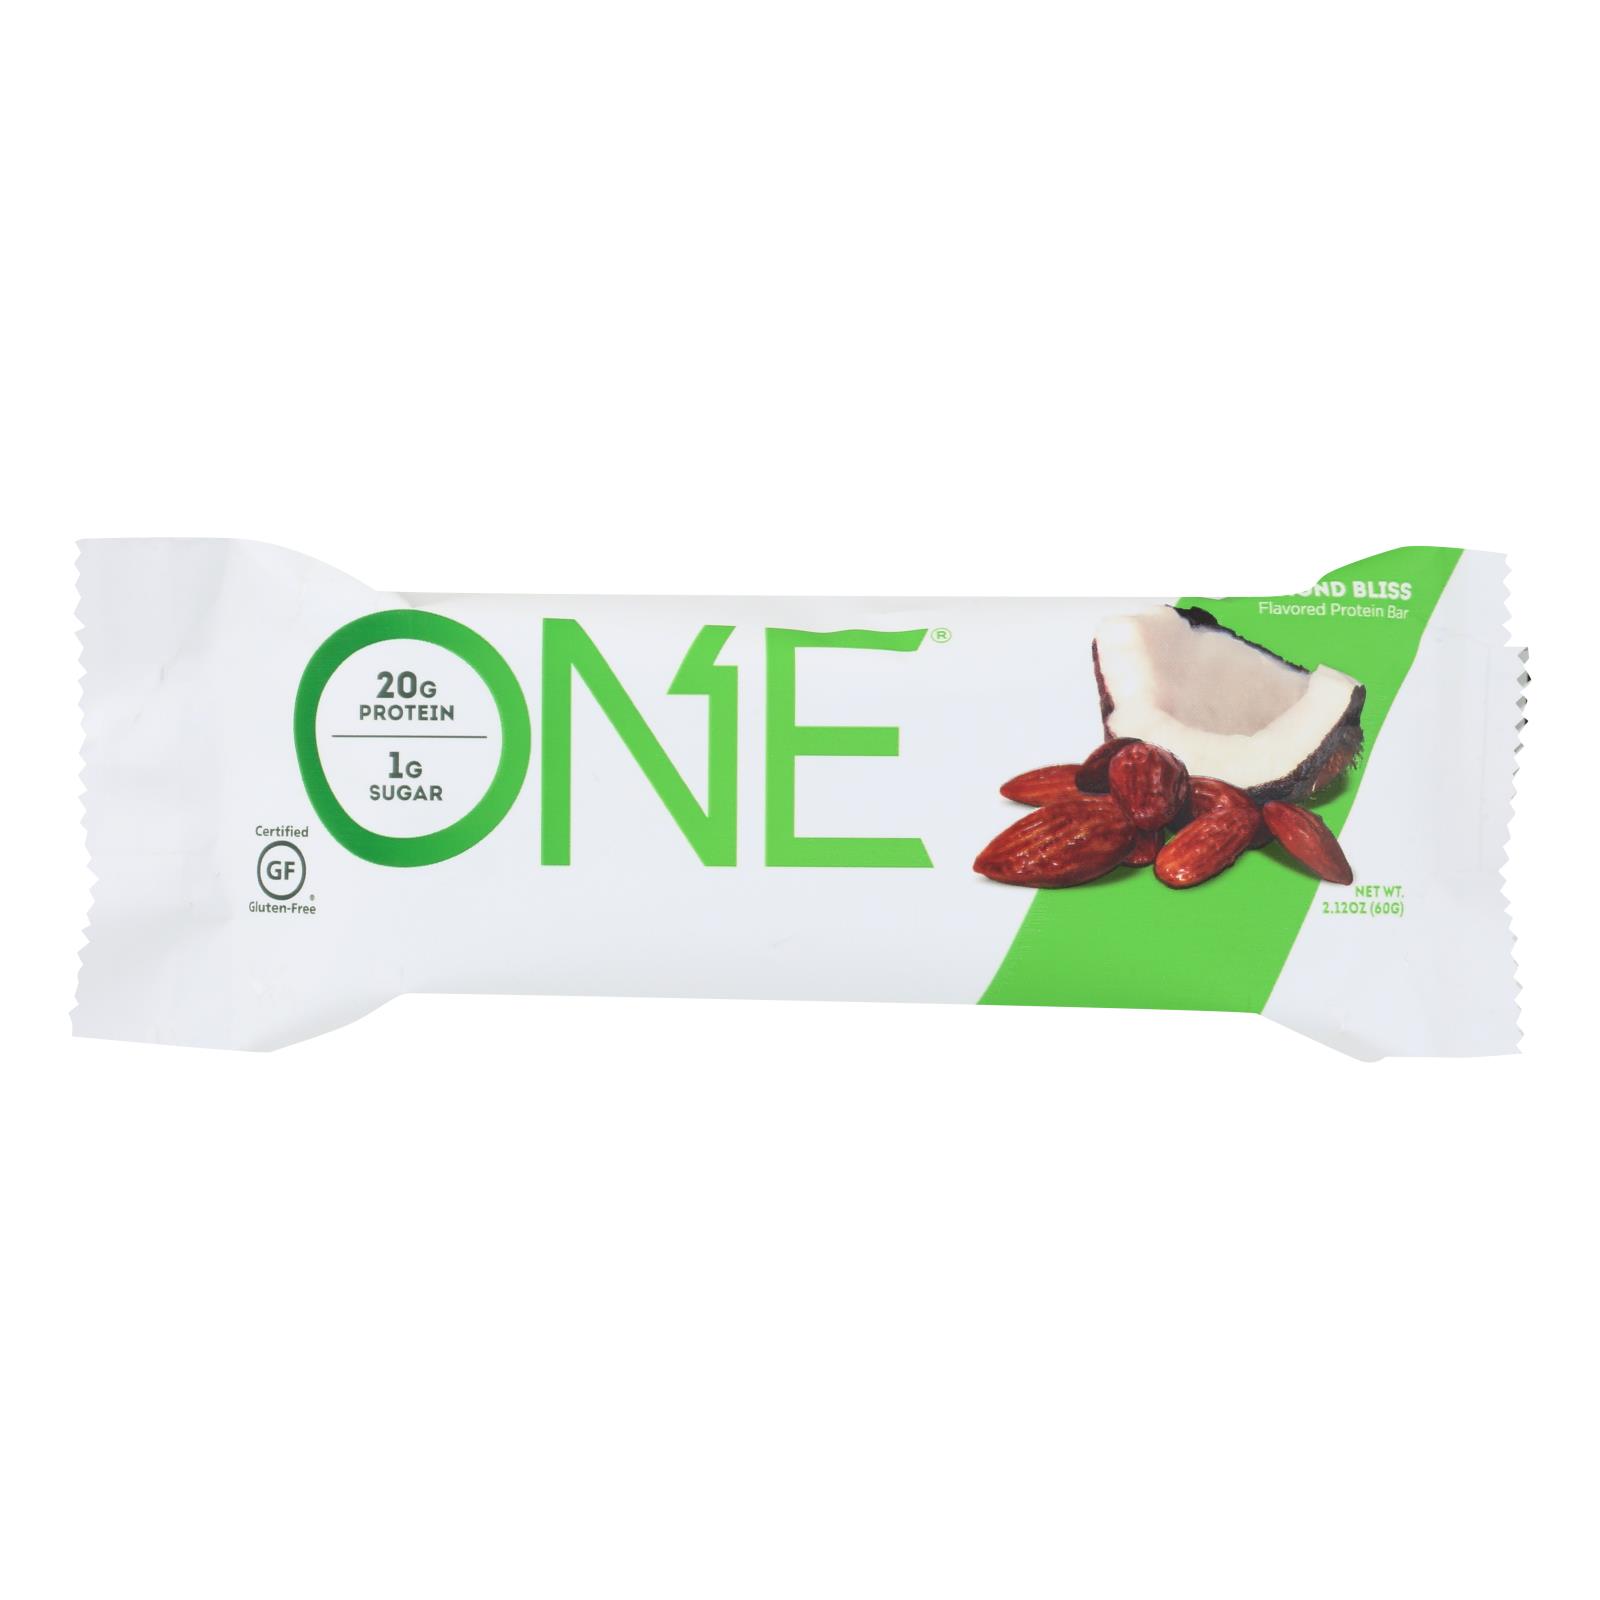 One's Almond Bliss Protein Bar - 12개 묶음상품 - 60 GRM